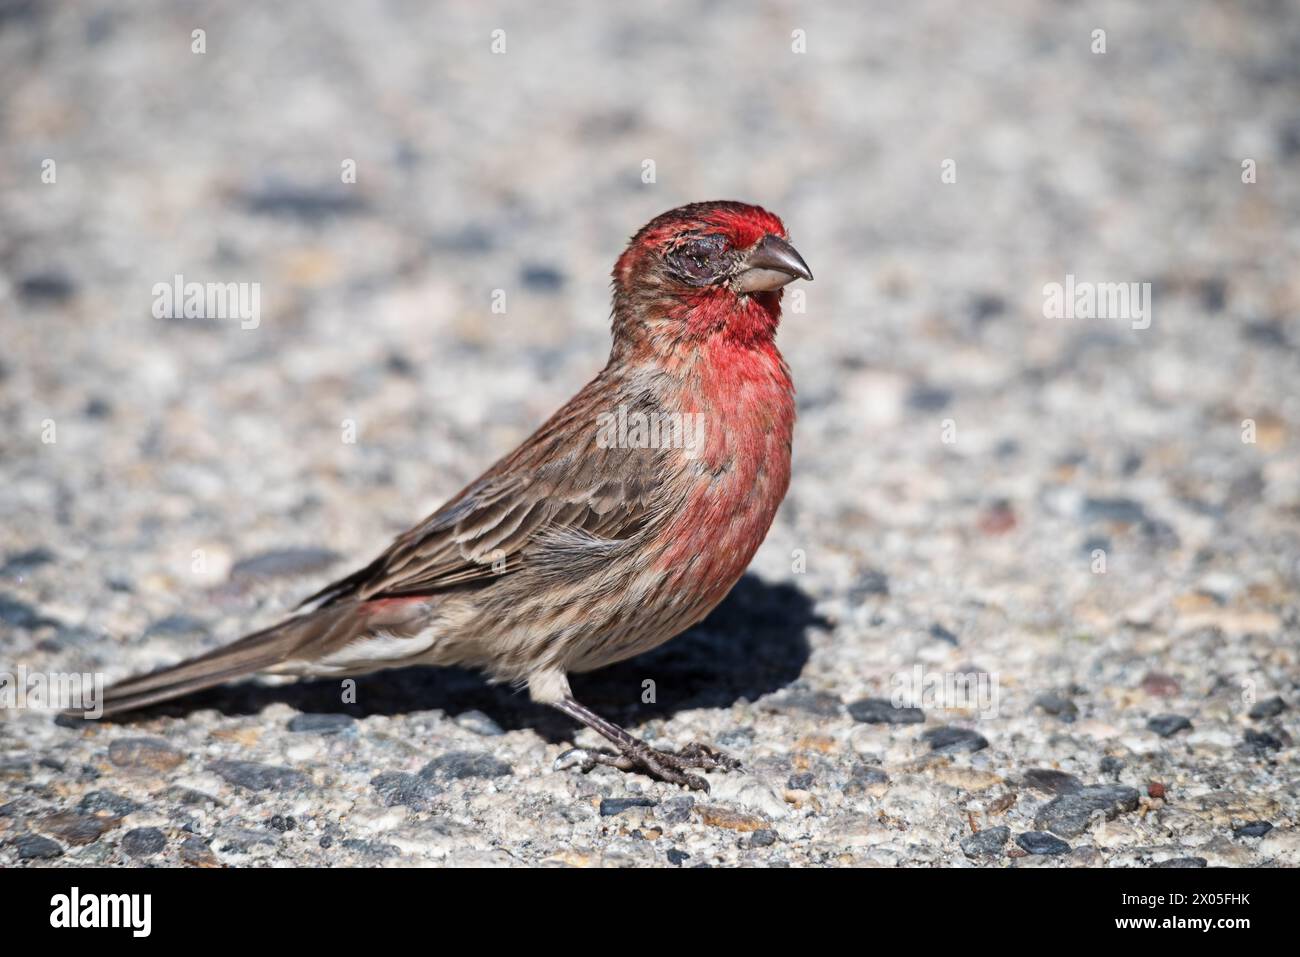 male house finch on the ground with severe house finch eye disease or mycoplasmal conjunctivitis Stock Photo